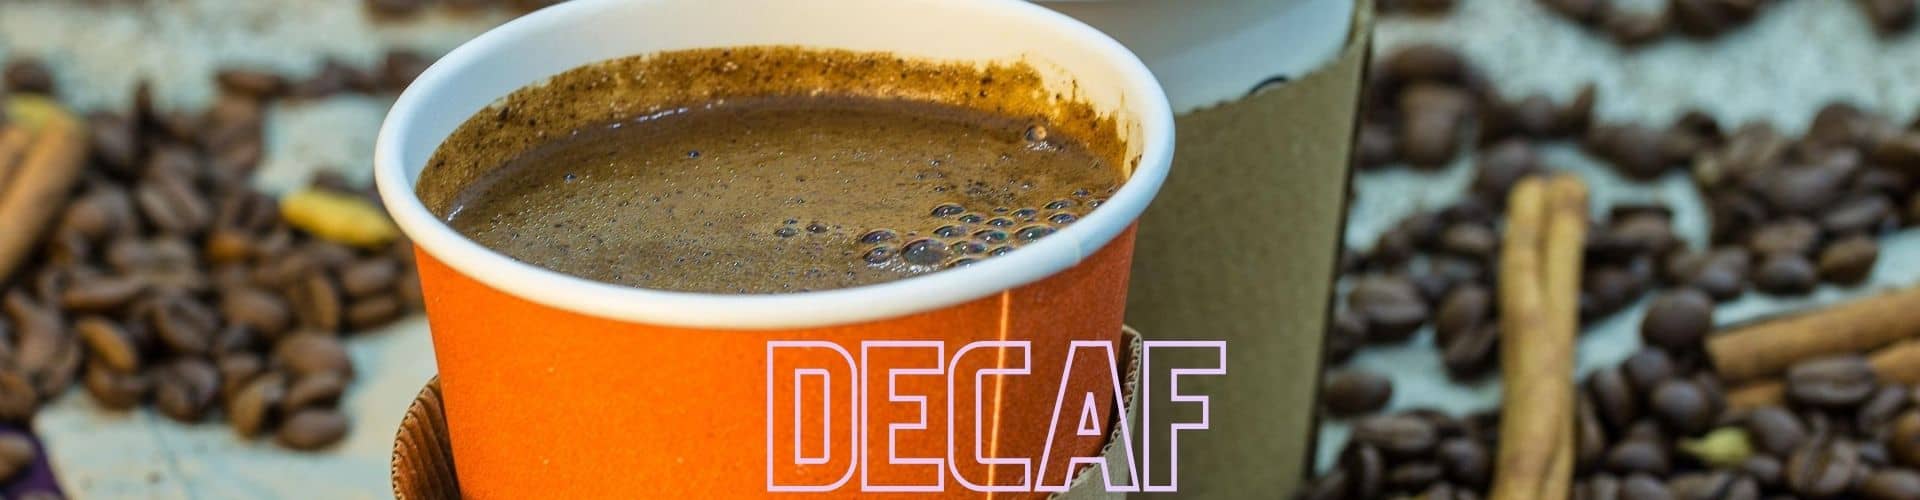 11 Best Decaf Coffee for People with No Plans to Give Up their Coffee Habit